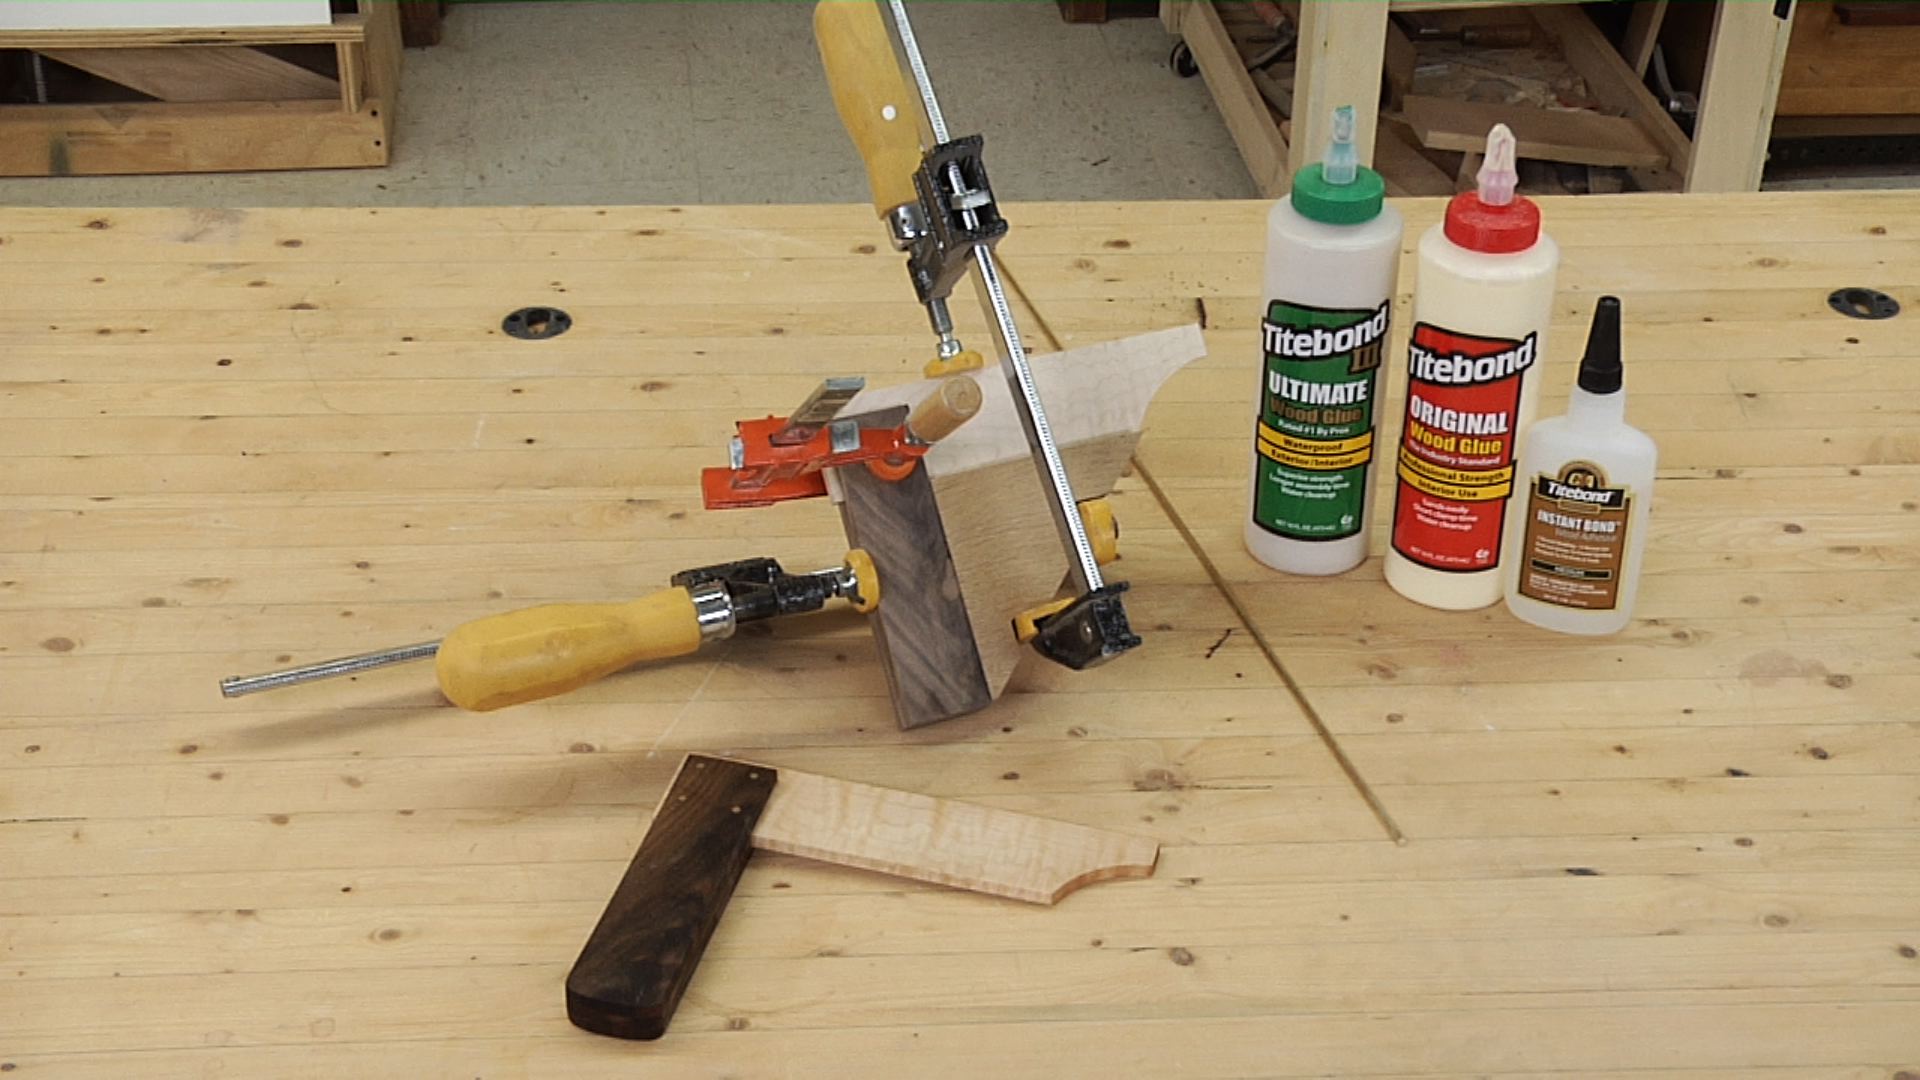 Clamped wood pieces and adhesive bottles